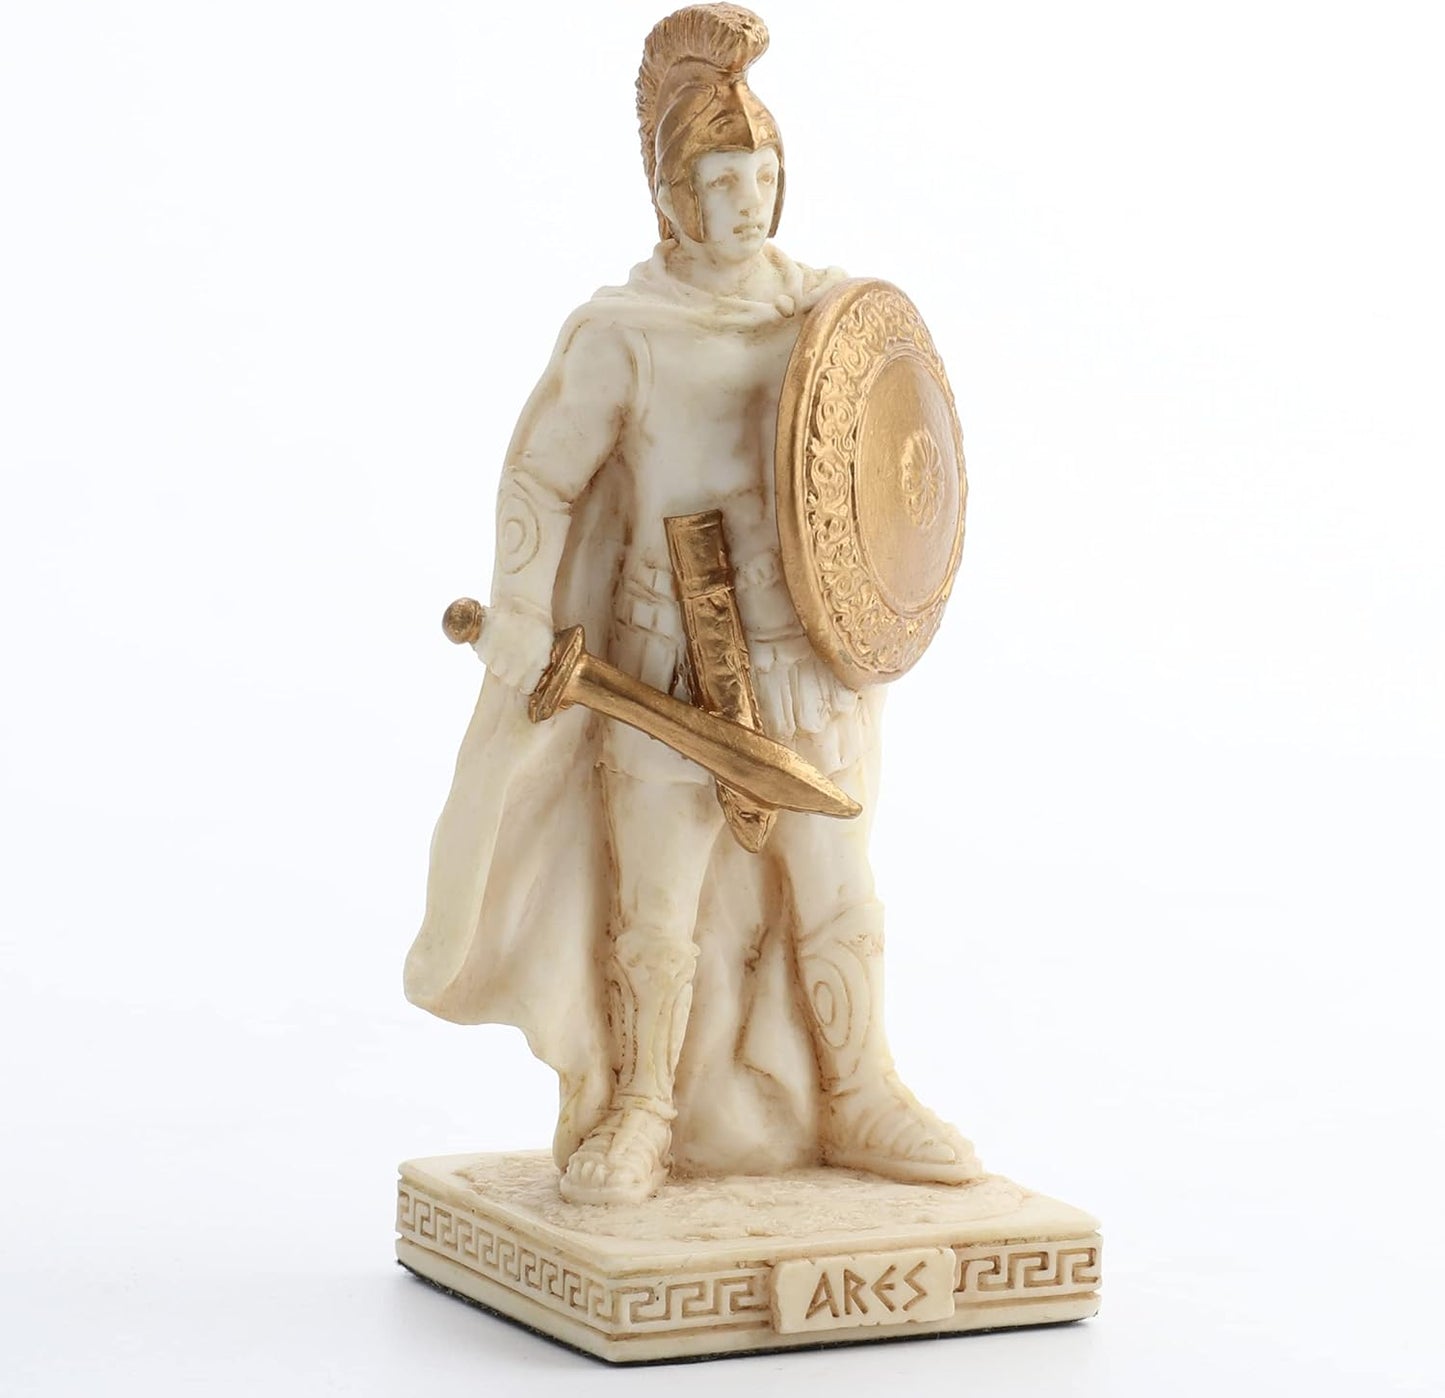 Ares The God of War Miniature Figurine